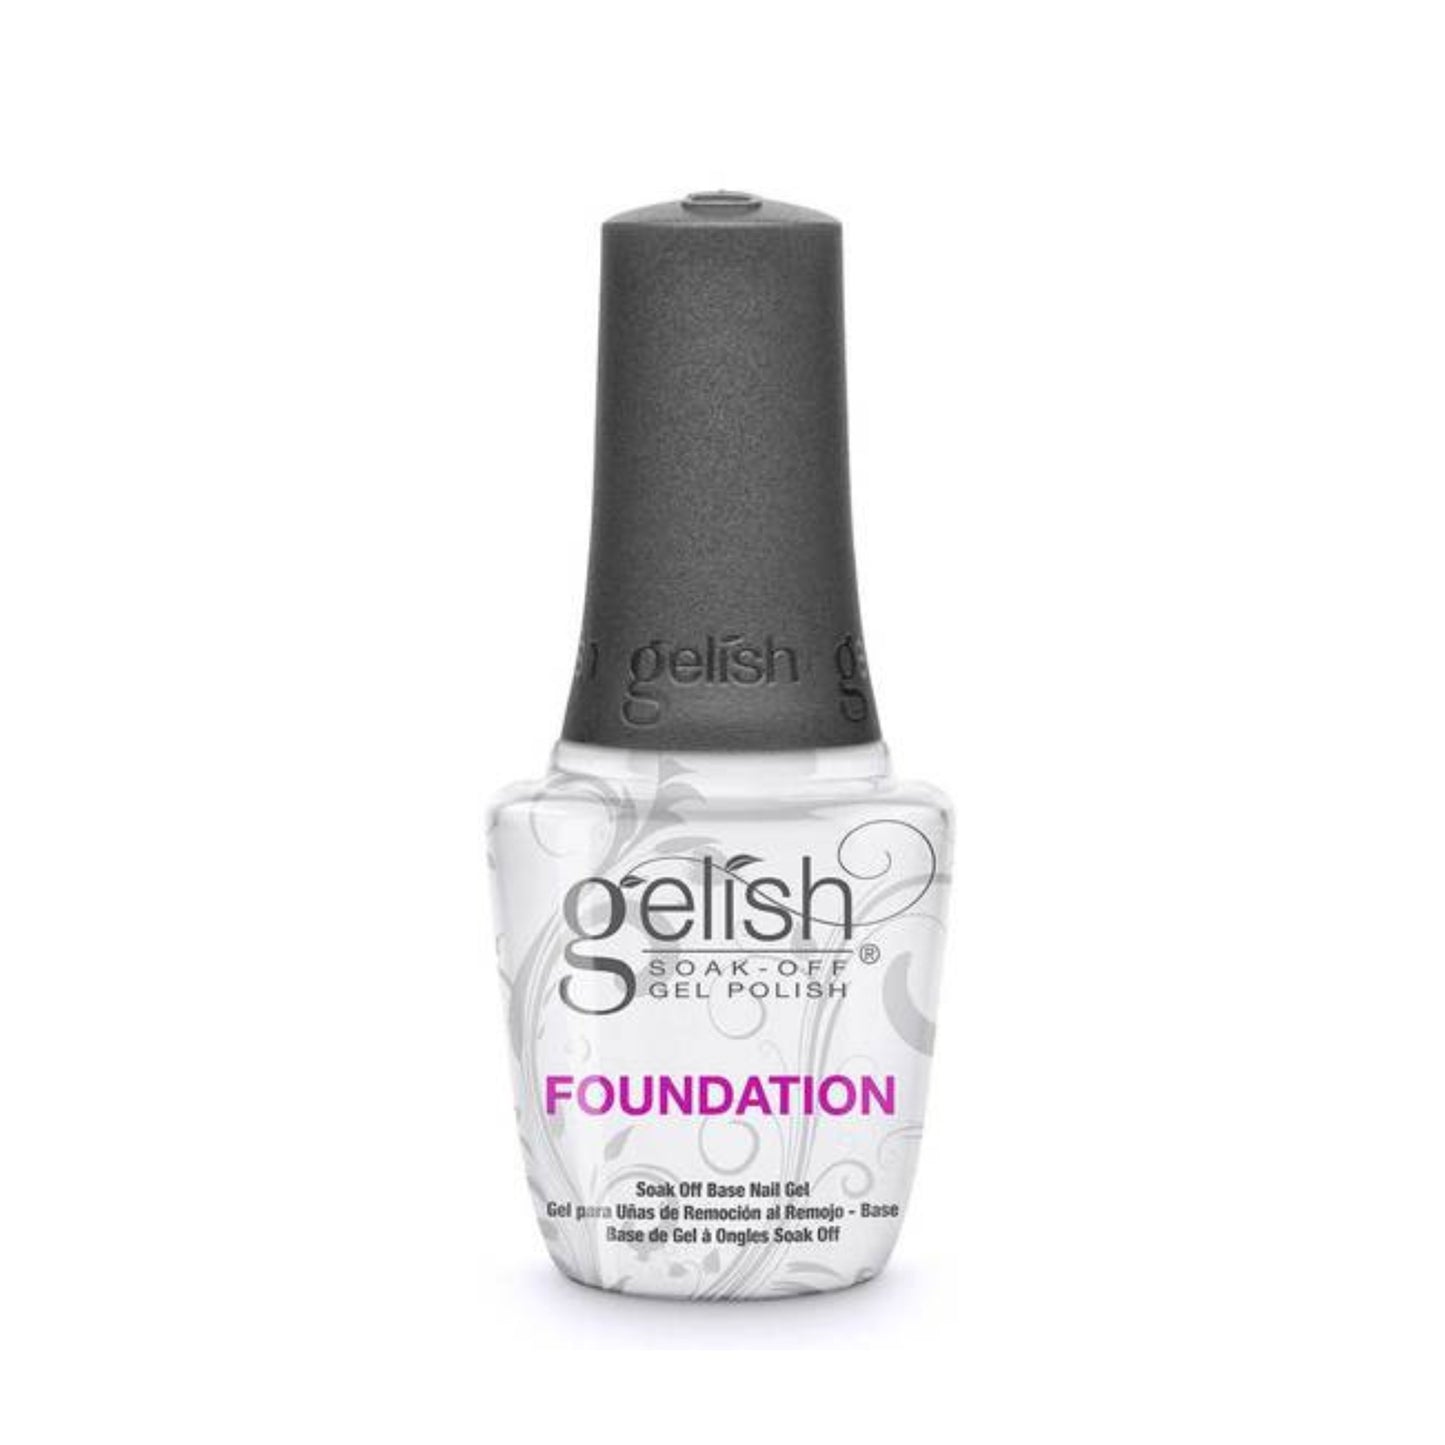 Gelish Foundation Base Gel apply like polish, with twist cap and applicator, but are cured in a LED lamp in 30 seconds or in two minutes in traditional UV lamps, just like gels